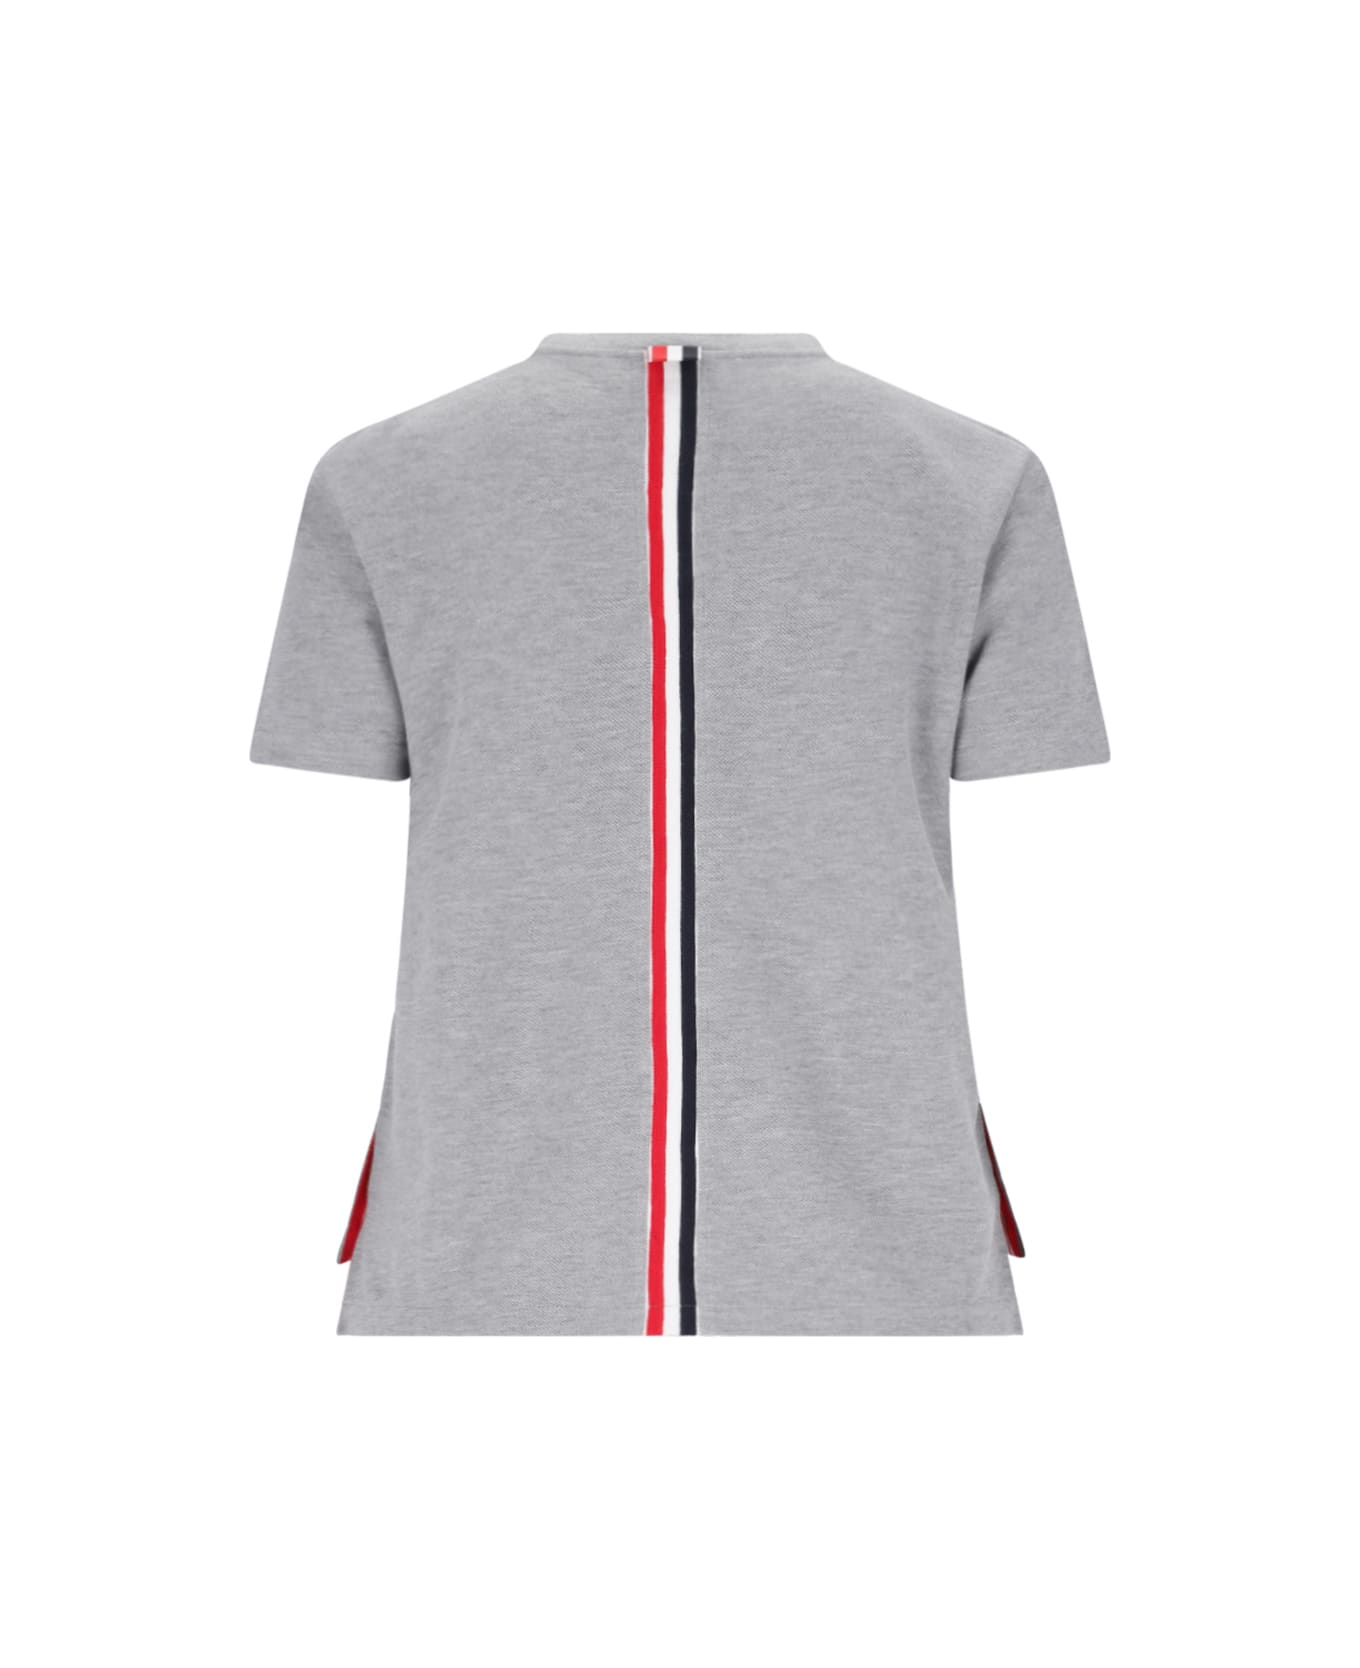 Thom Browne Tricolor Detail T-shirt On The Back - Gray